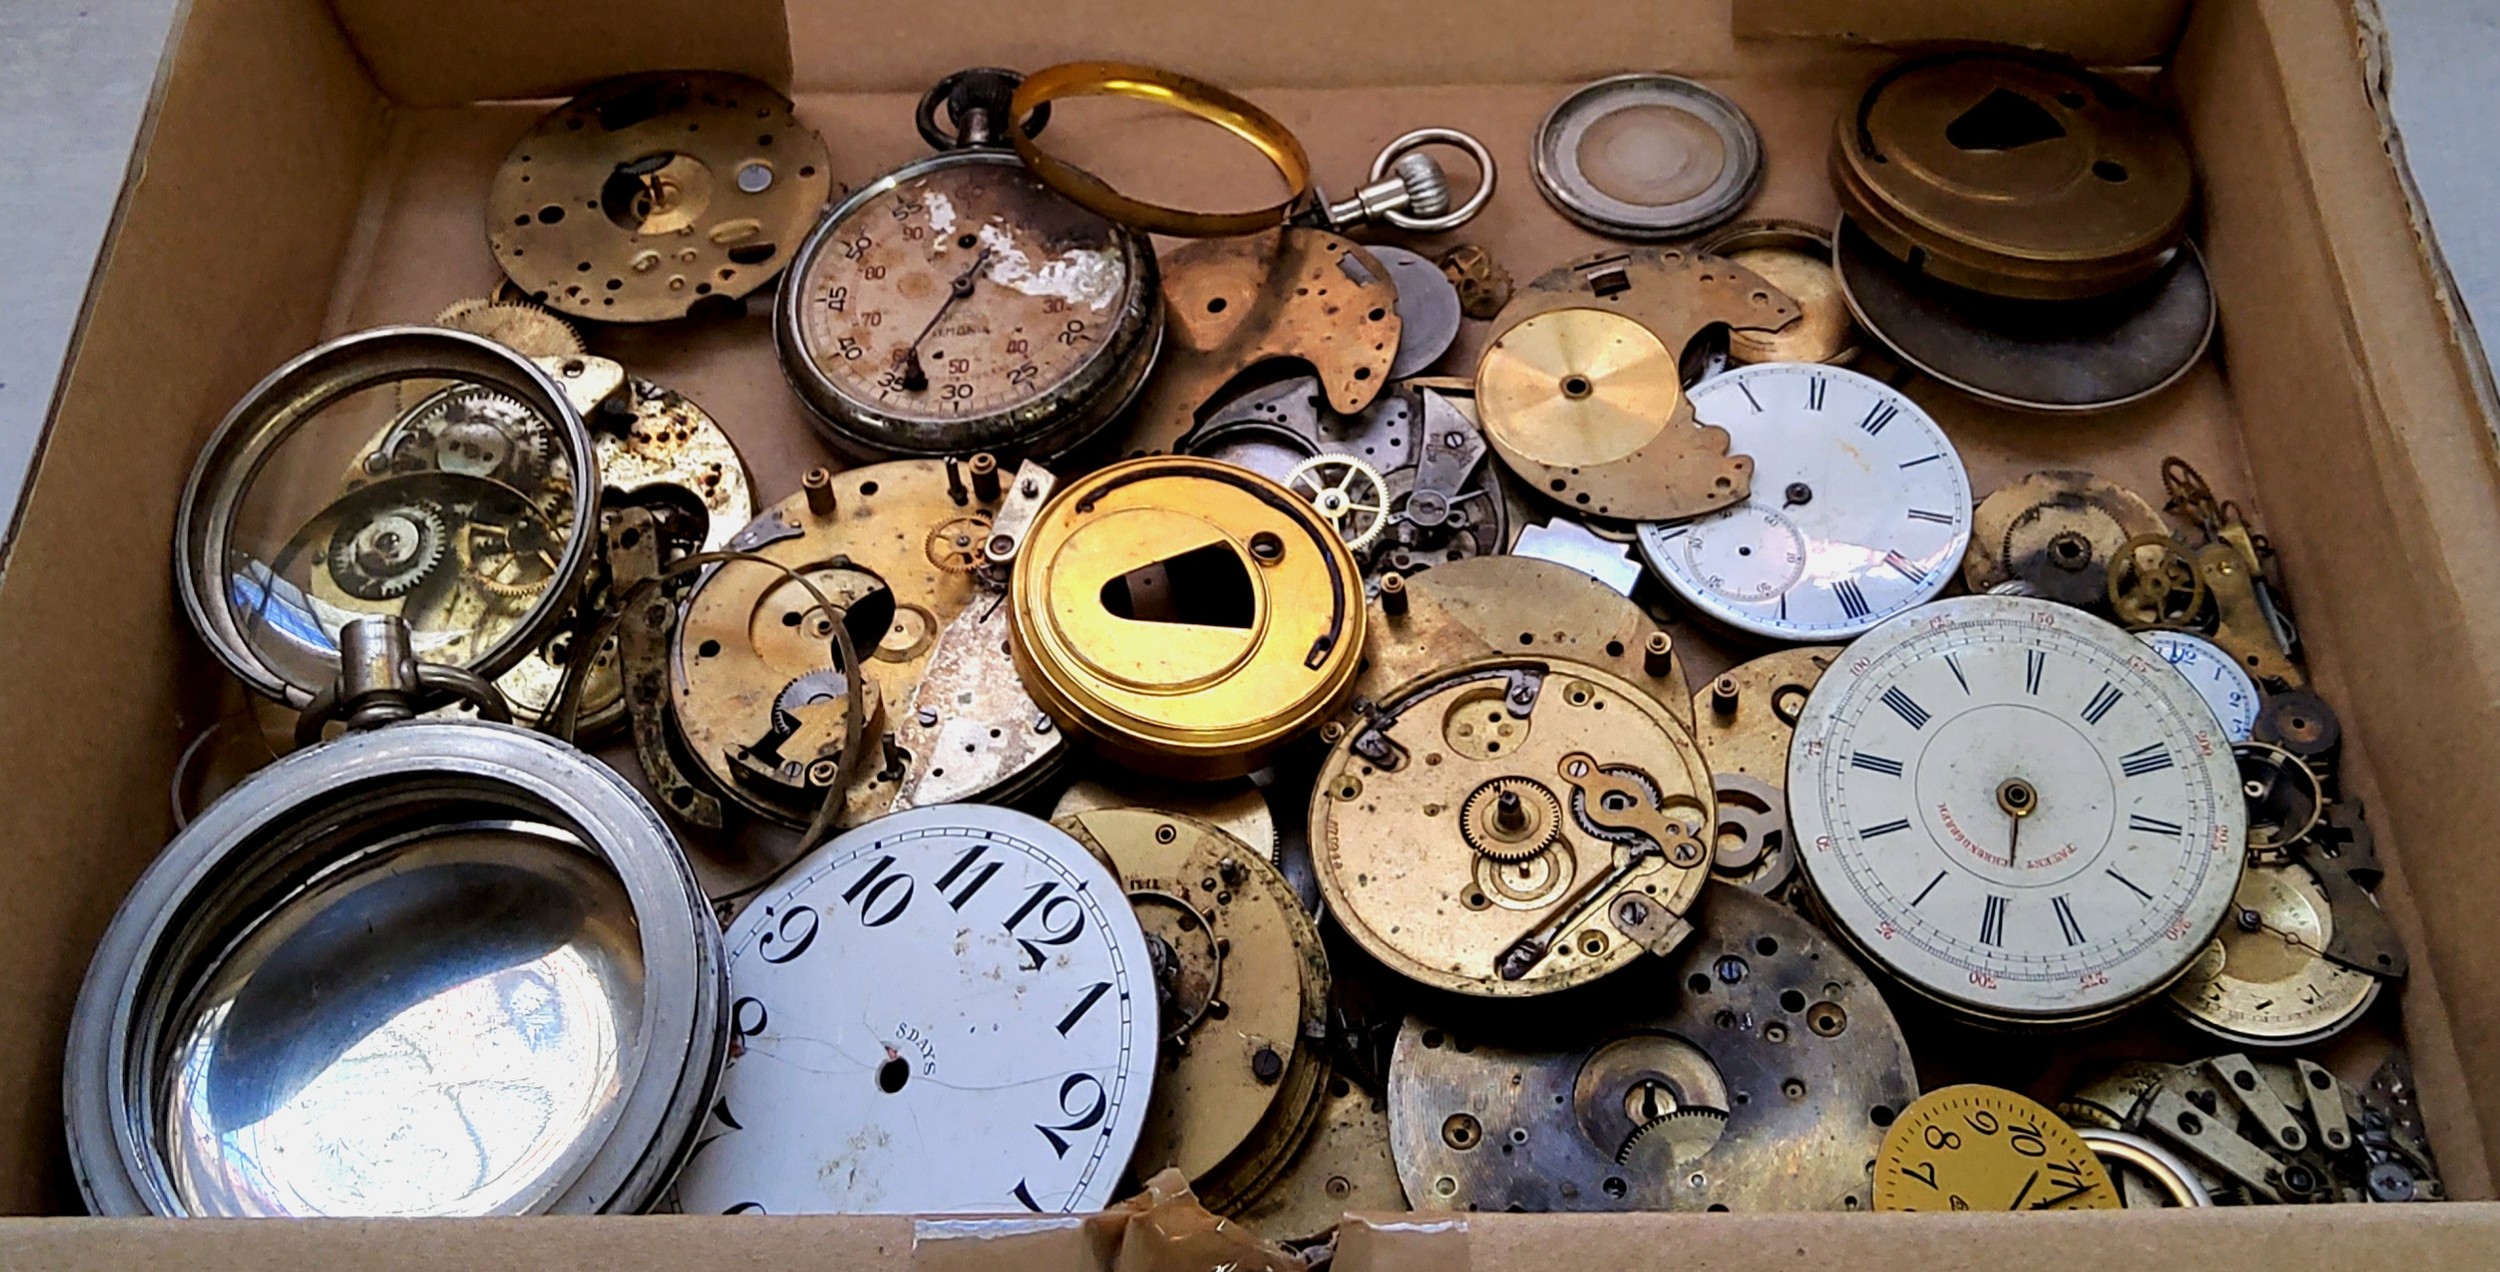 Horology - Various 19th century and later pocket watch parts including cogs, dials and repair parts.